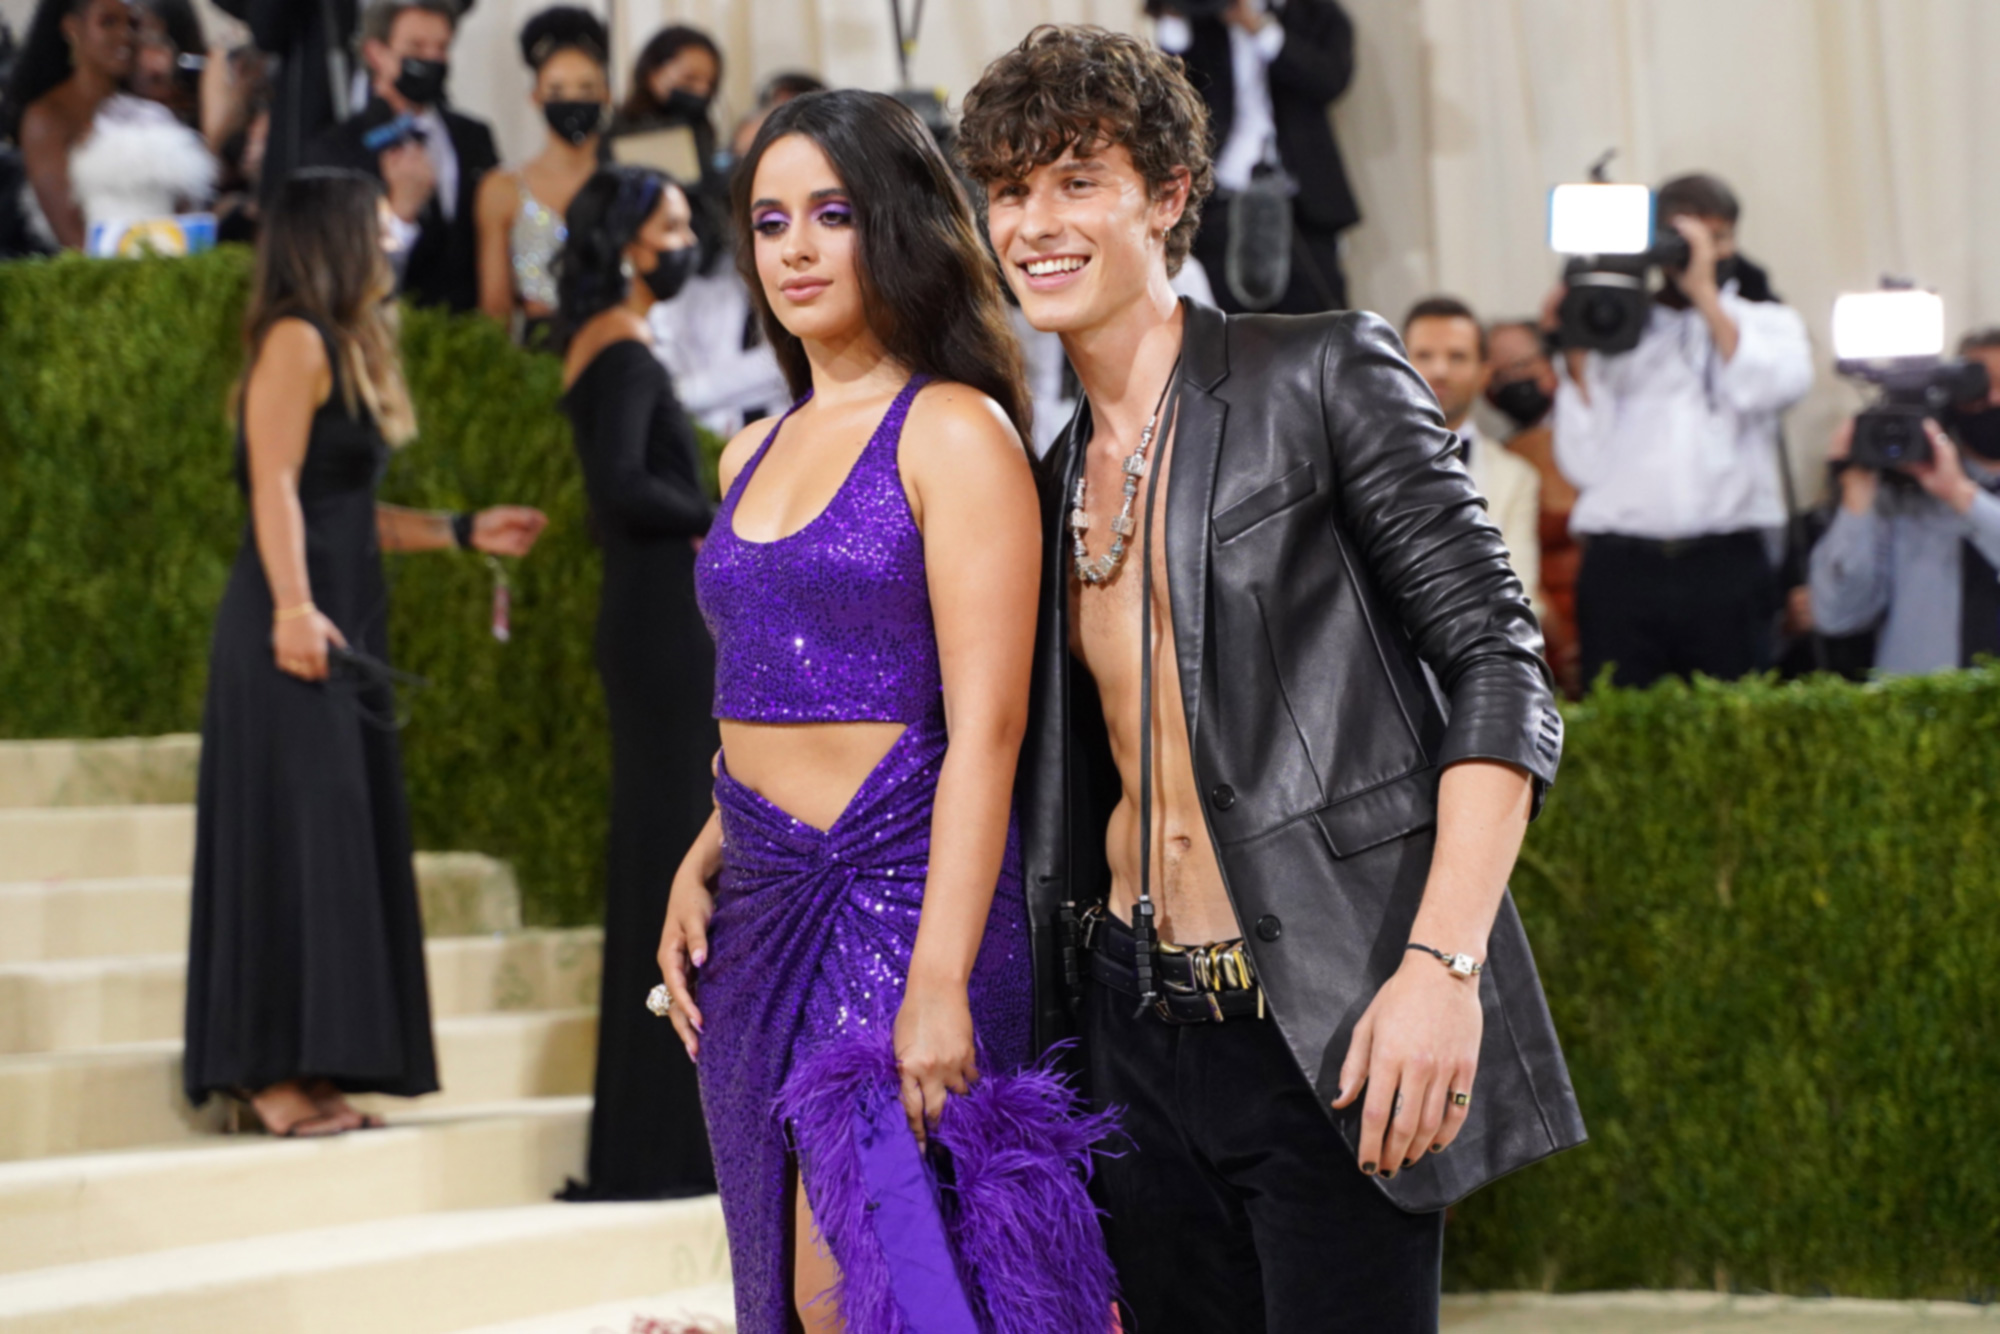 Shawn Mendez and Camila Cabello split after dating for 2-years